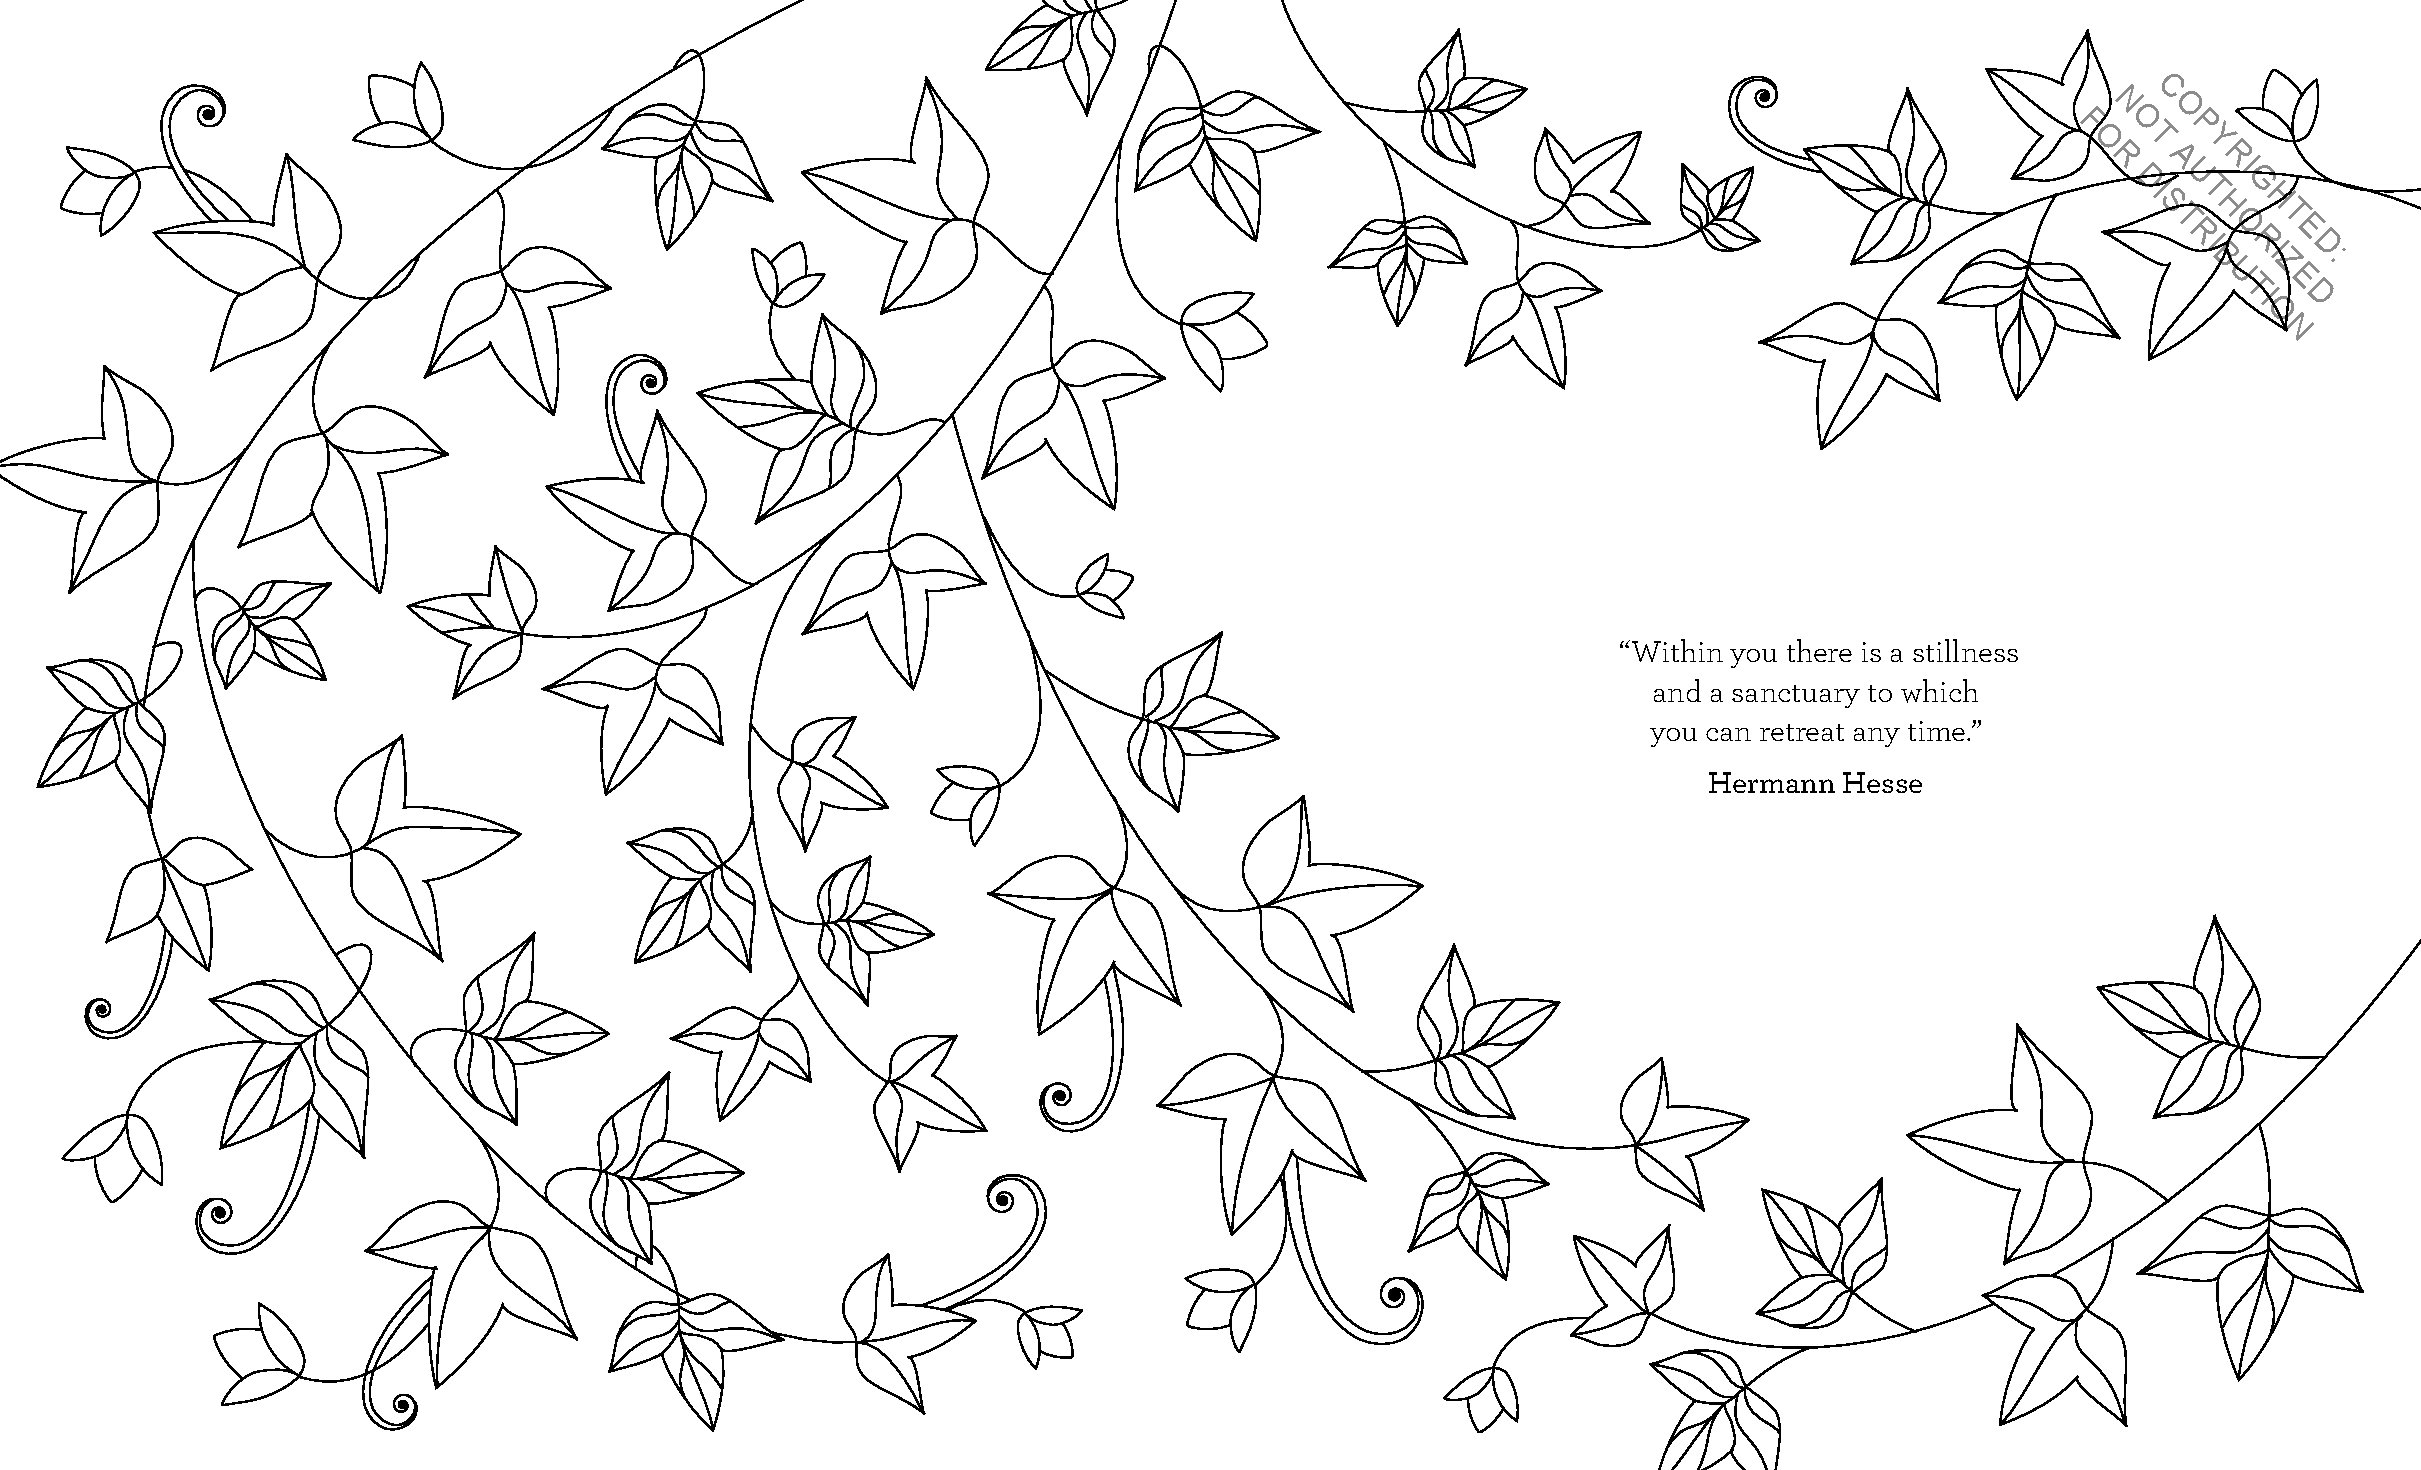 The Coloring Book of Mindfulness